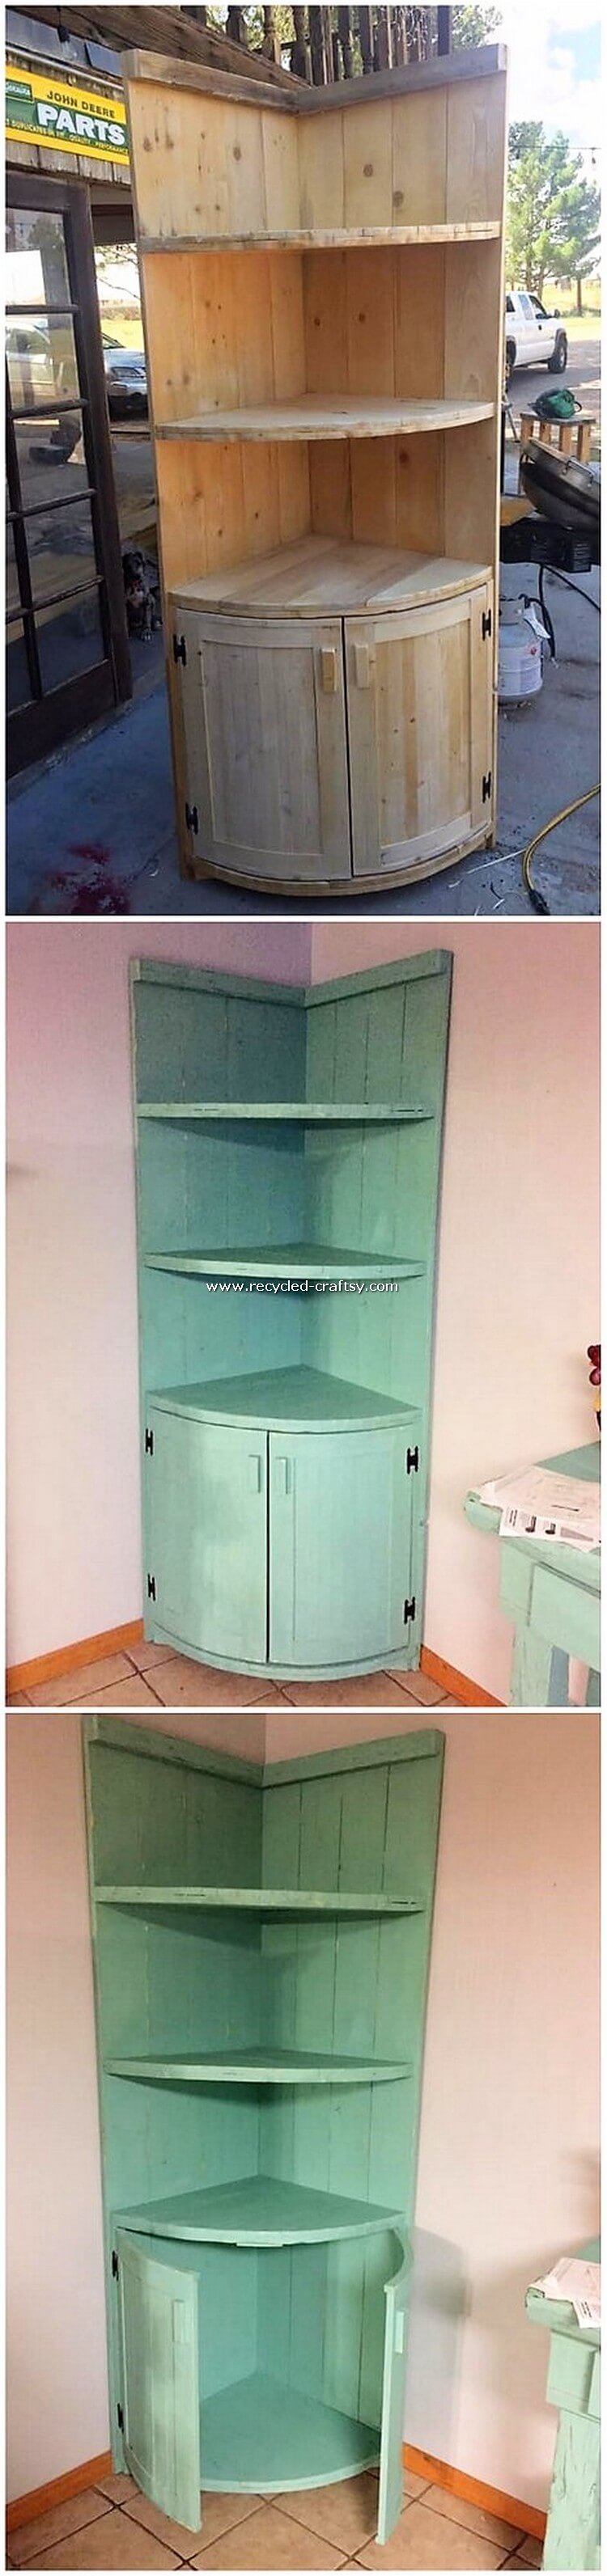 Pallet Shelving Unit with Cabinet